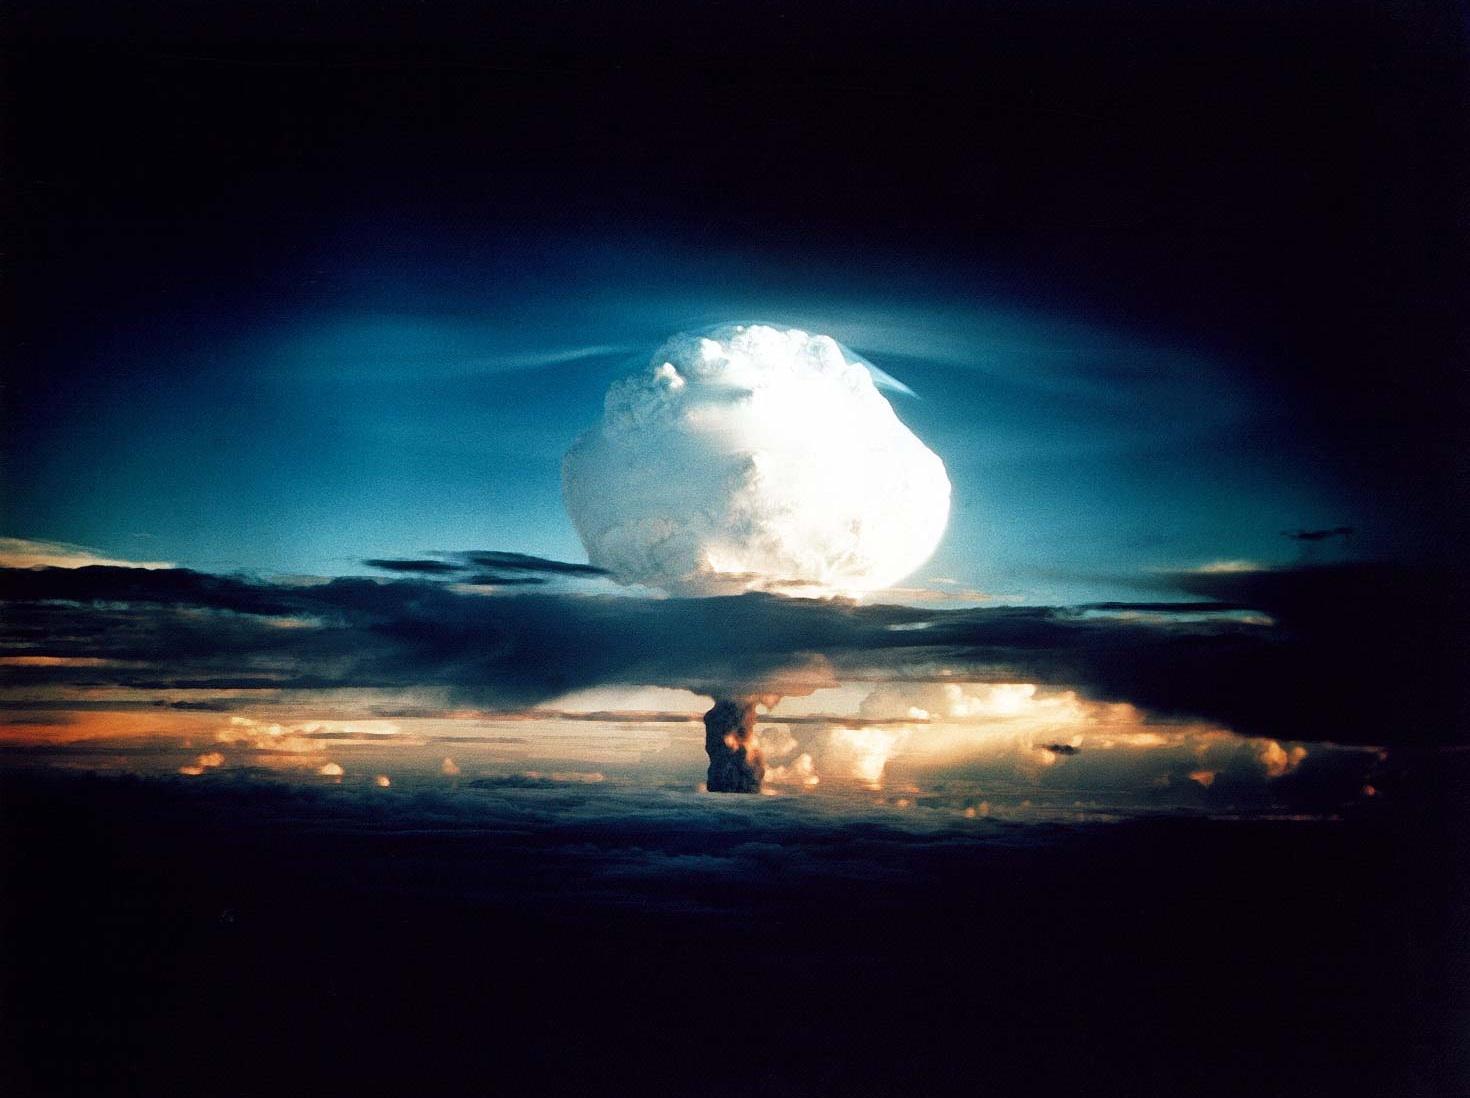 Atomic tests – Nuclear Cartographies